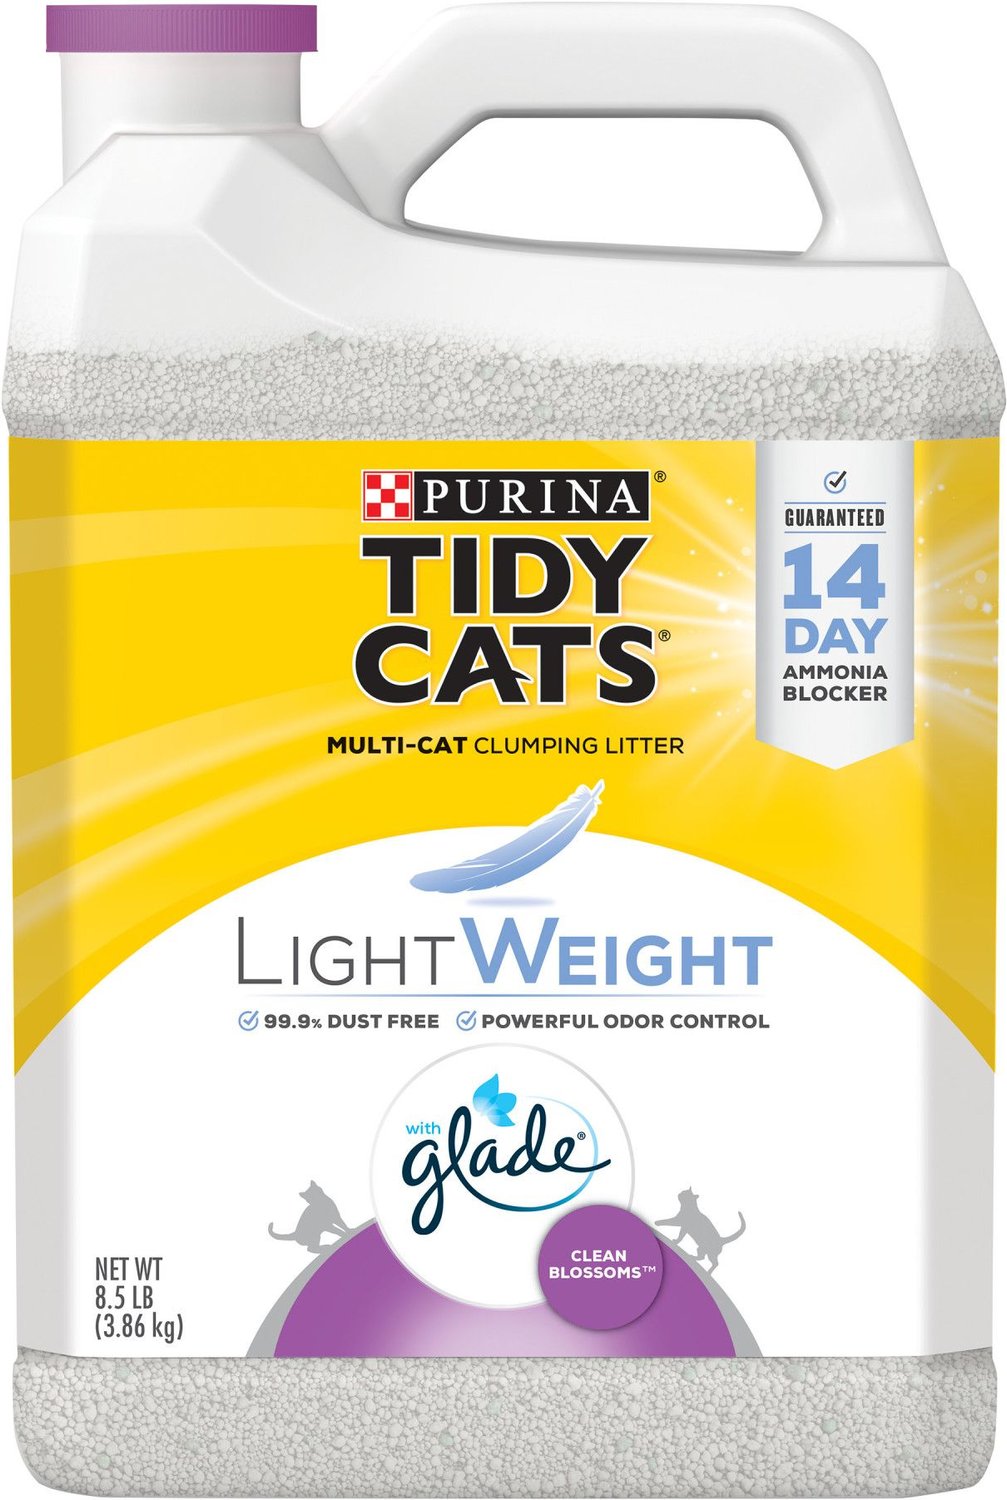 Tidy Cats LightWeight Clean Blossoms Scent Glade Tough Odor Solutions